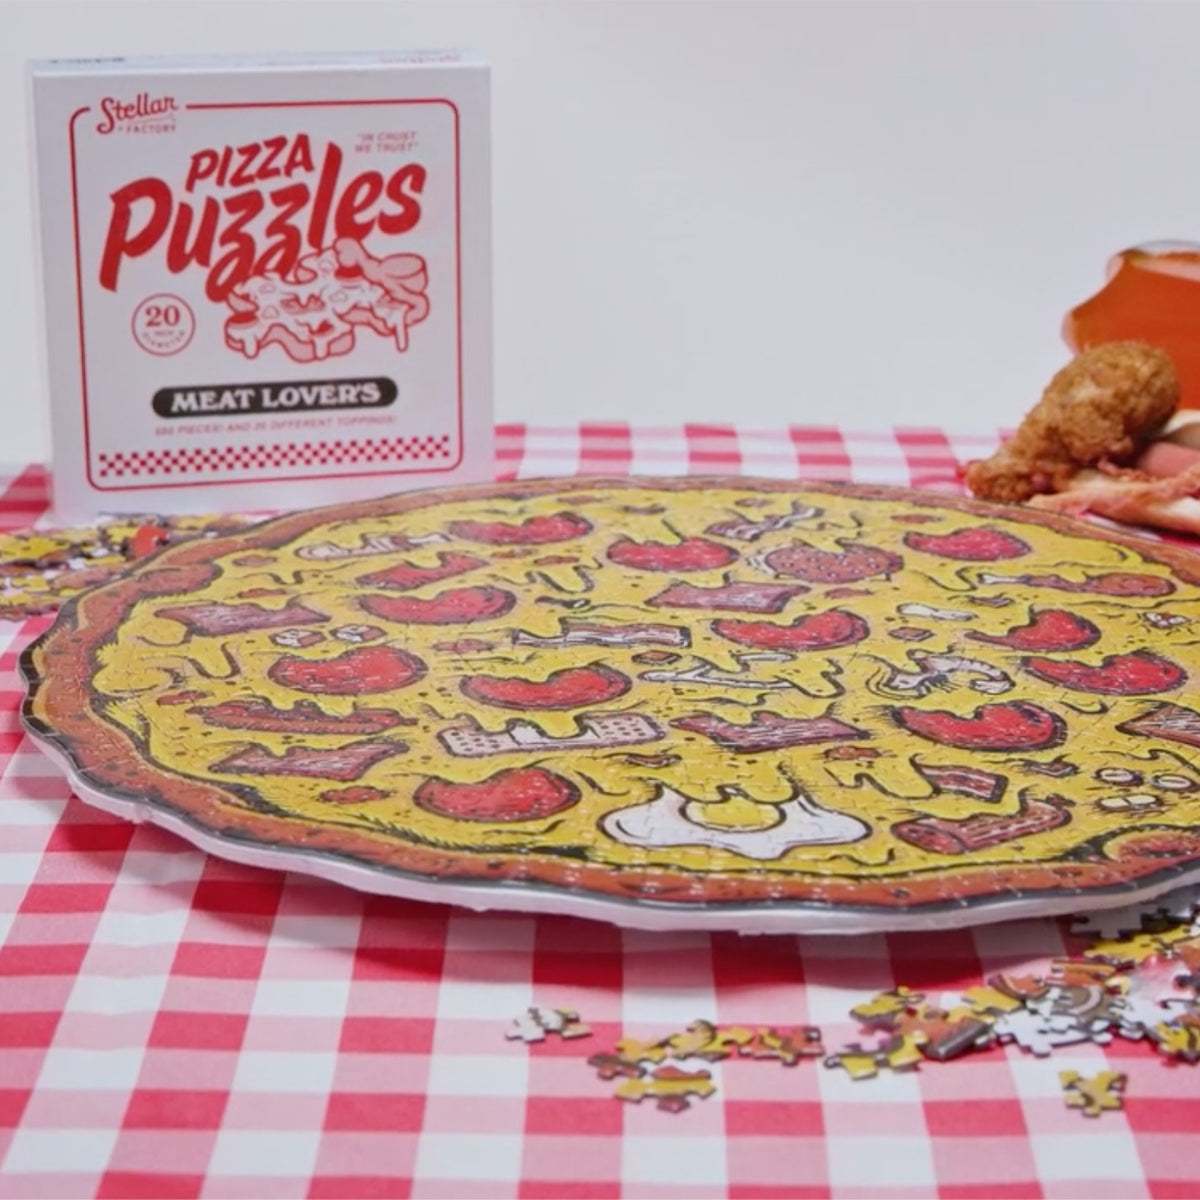 Pizza Puzzles Meat Lover's Stellar Factory